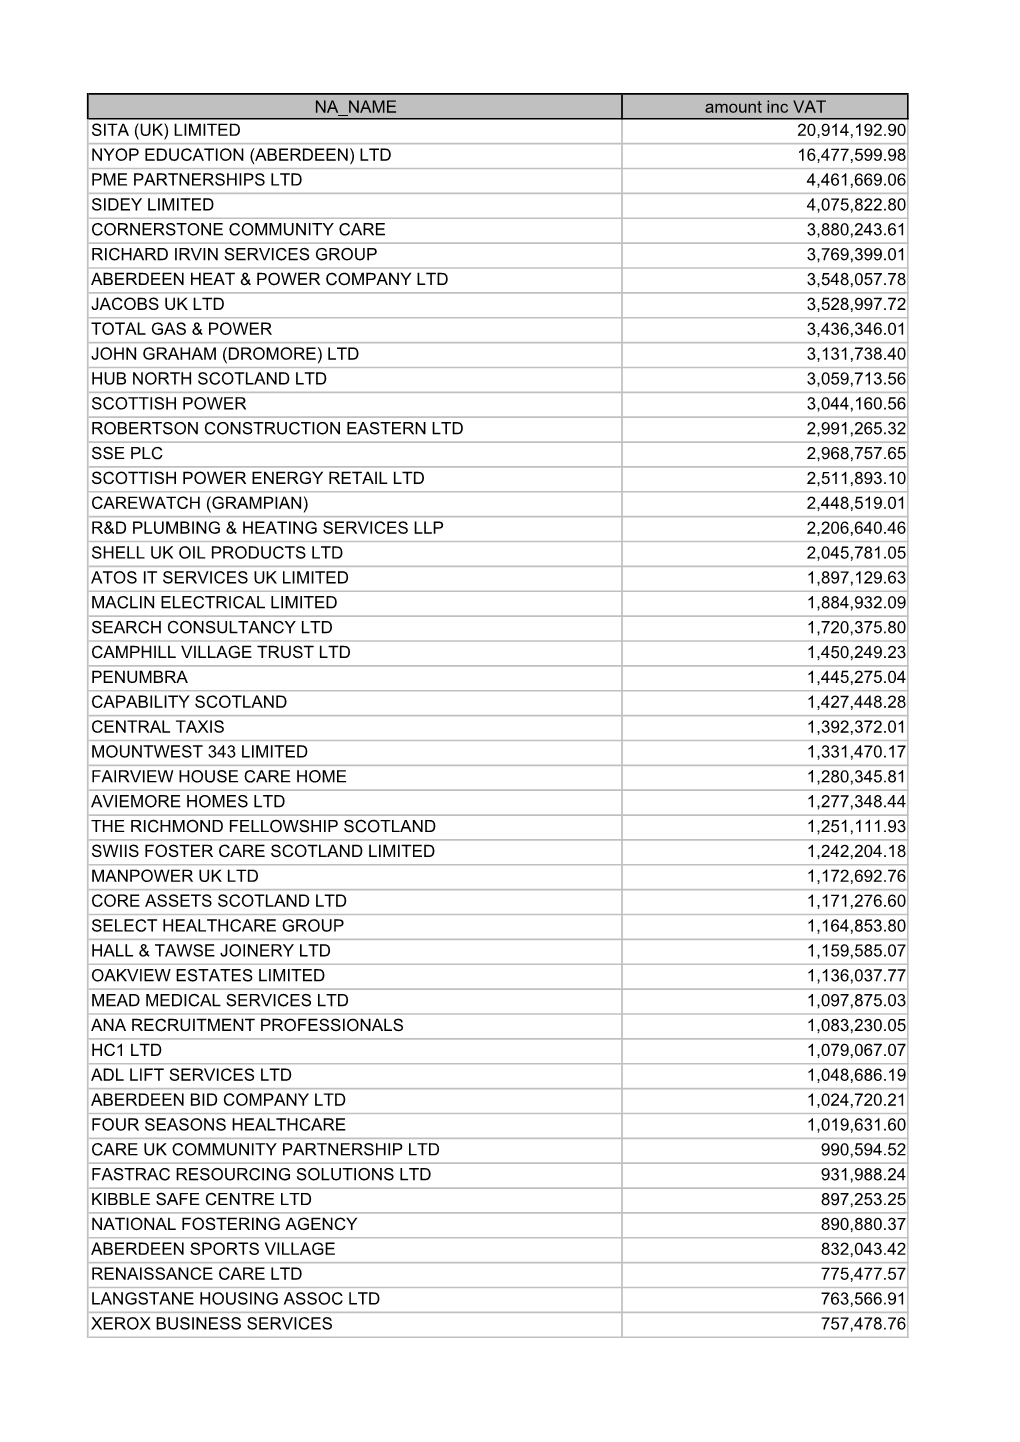 Copy of Trade Creditors 2013 Total Payment with Invoices GE